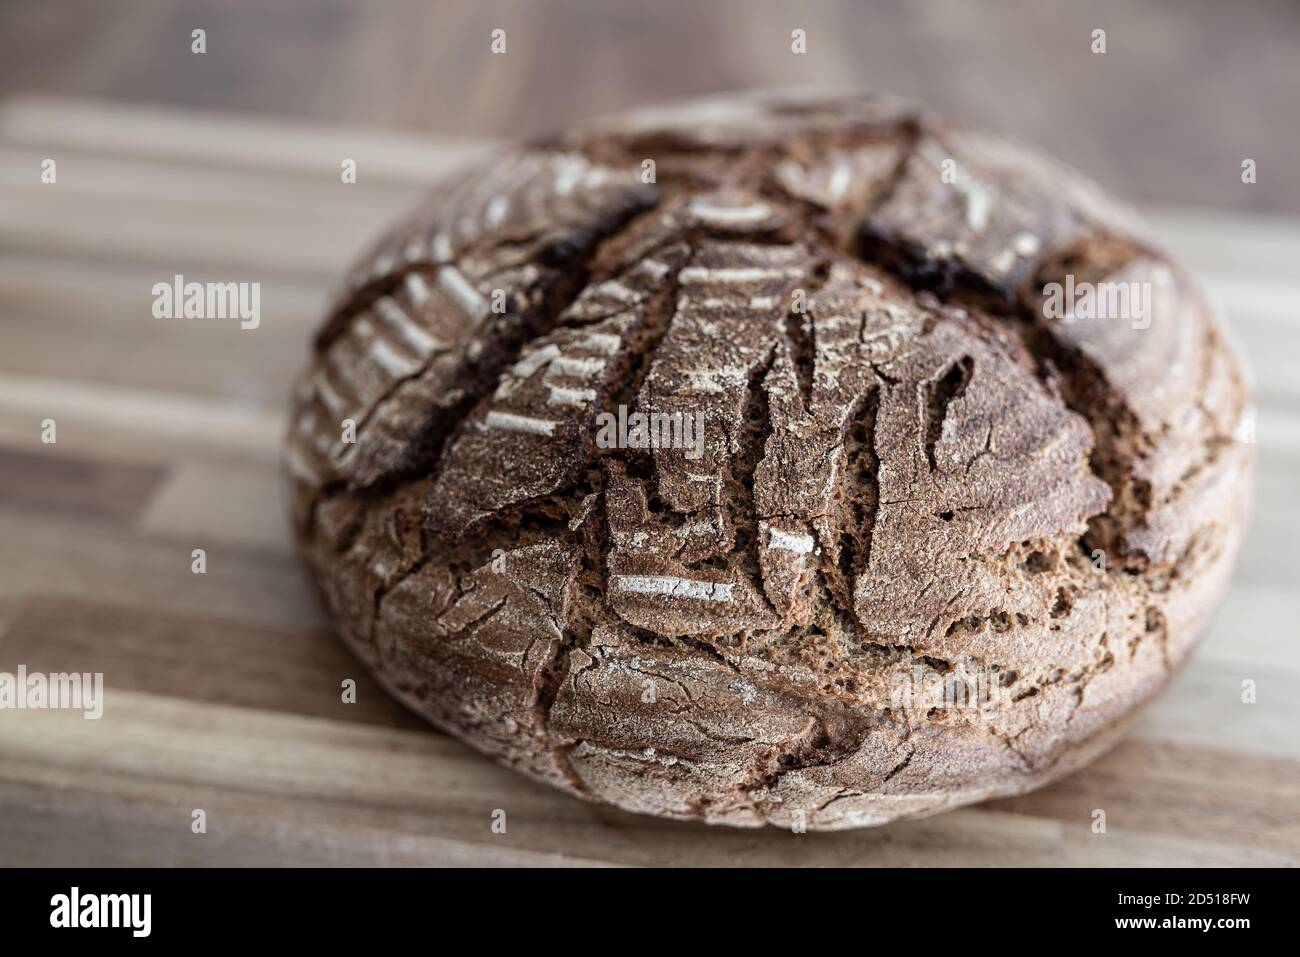 close-up of freshly baked homemade rye sourdough bread on wooden table Stock Photo